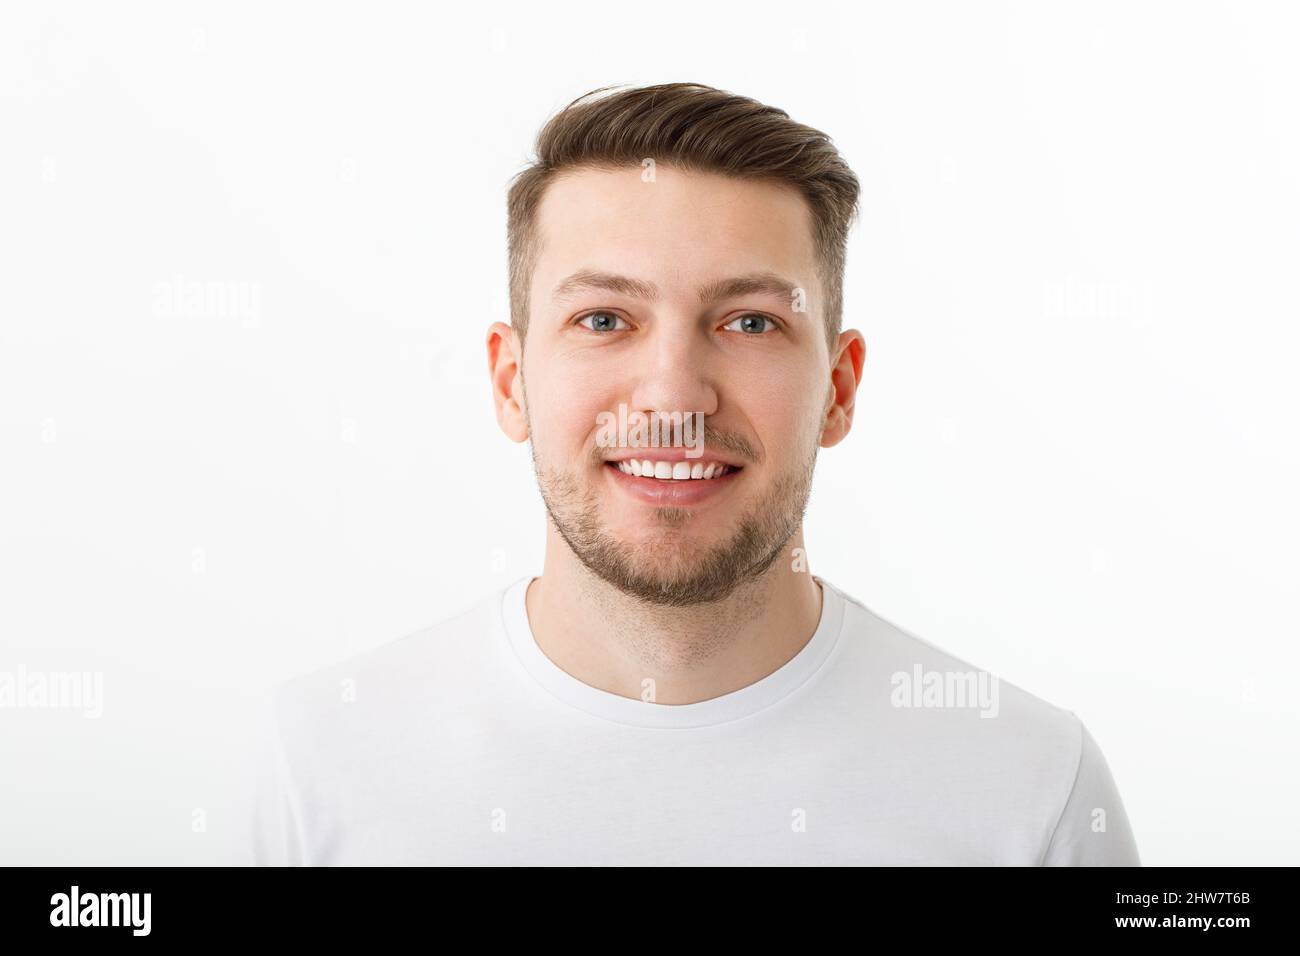 Portrait of a cheerful young man in a white T-shirt on a white background. The guy is standing looking at the camera and smiling. Stock Photo